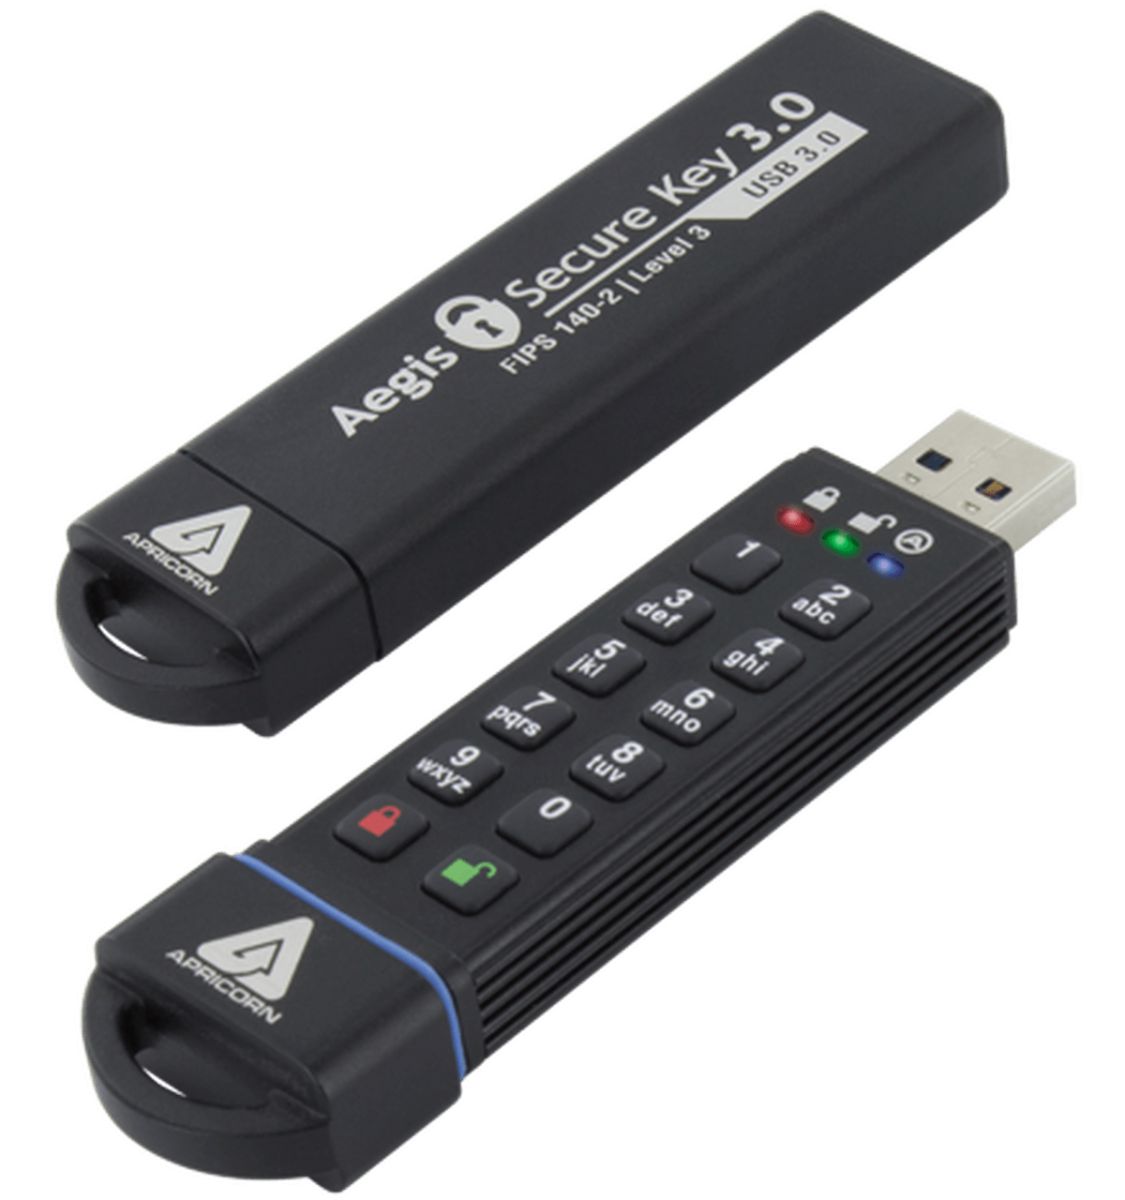 apricorn ask3 fips 60gb usbstick